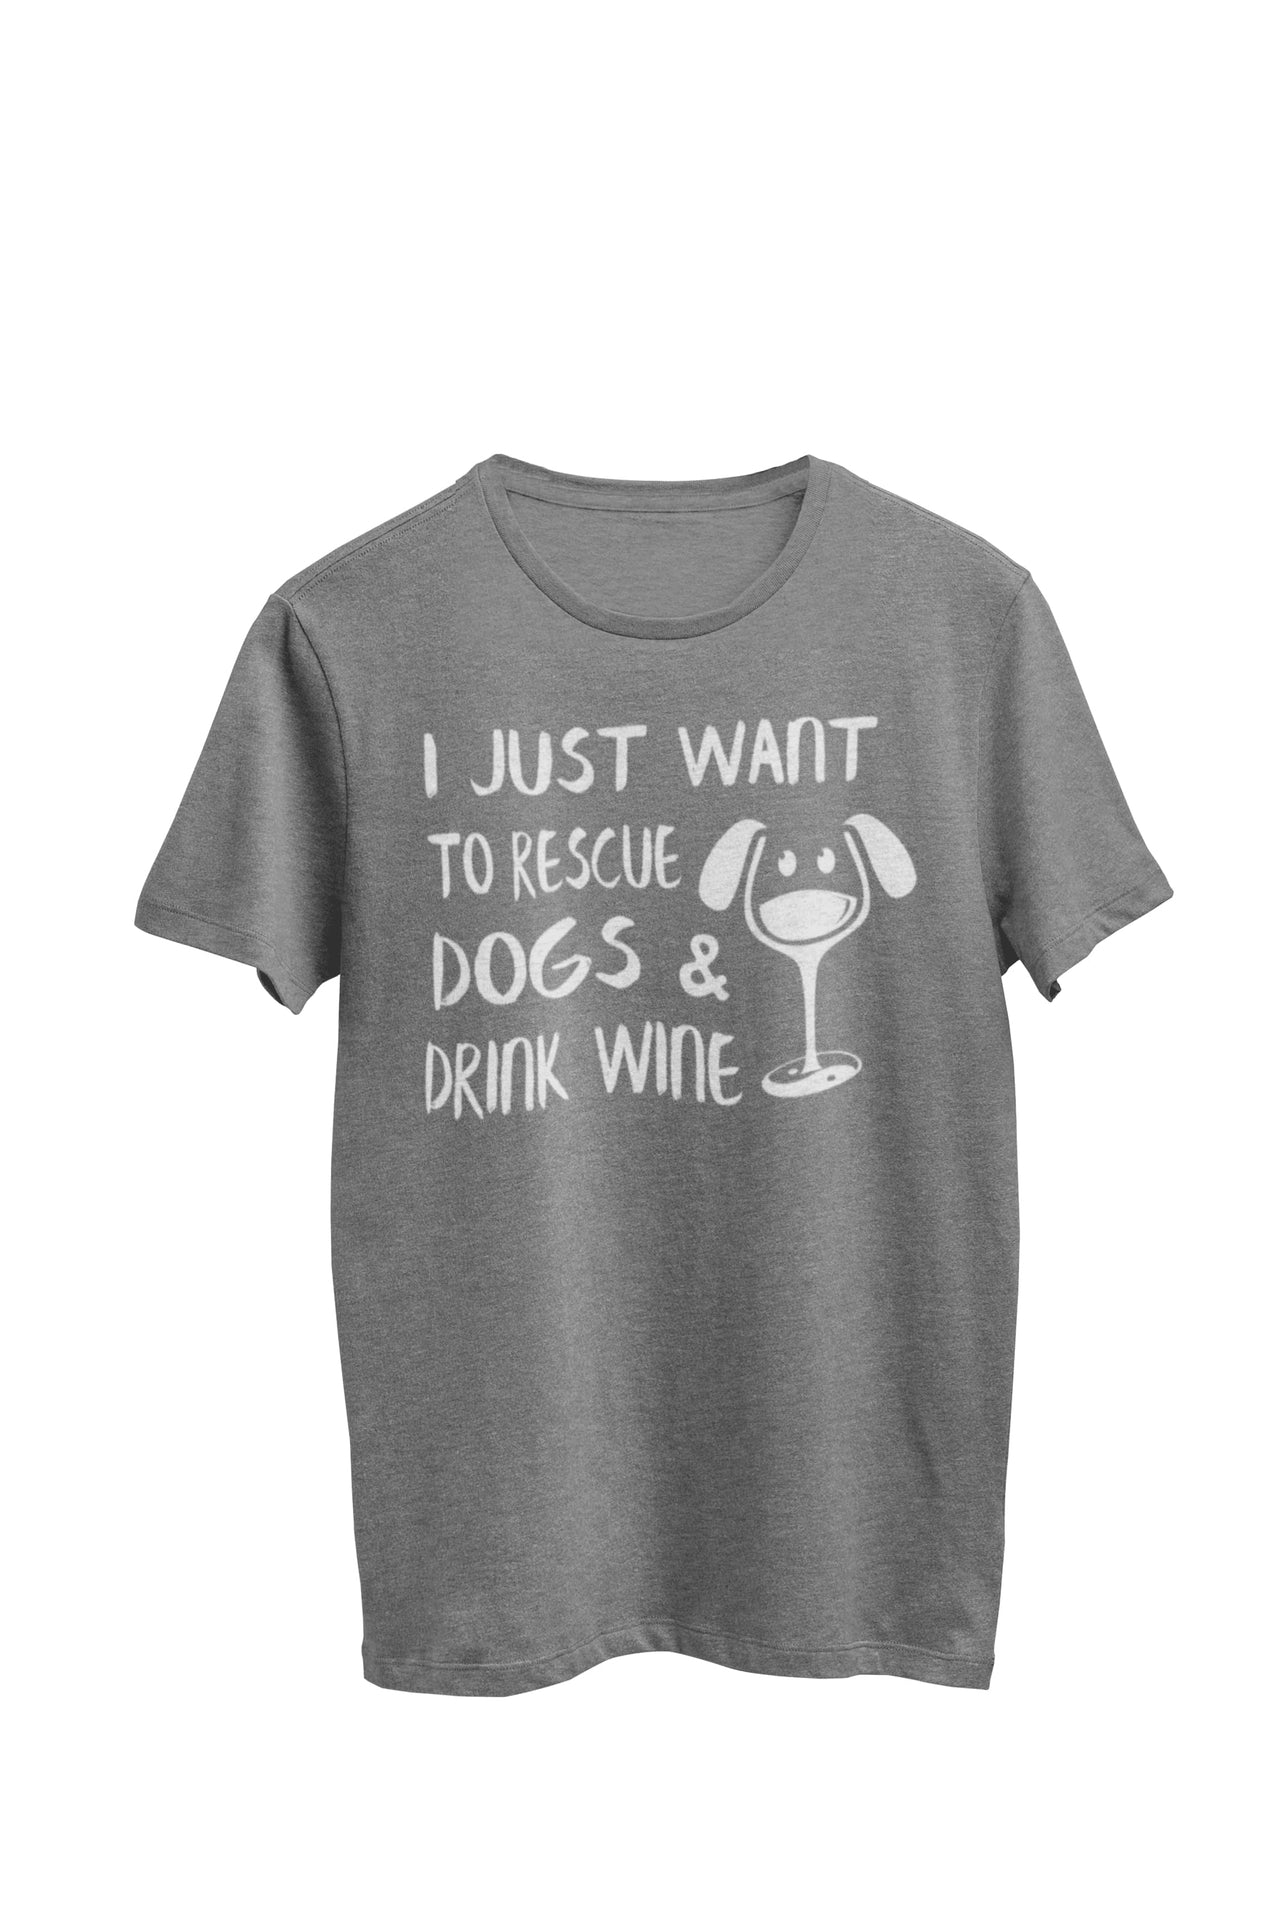 Heather Gray Unisex T-shirt with the text 'I just want to rescue dogs and drink wine,' featuring a charming dog adorning a wine glass with a yin yang symbol on the stem. Designed by WooHoo Apparel.